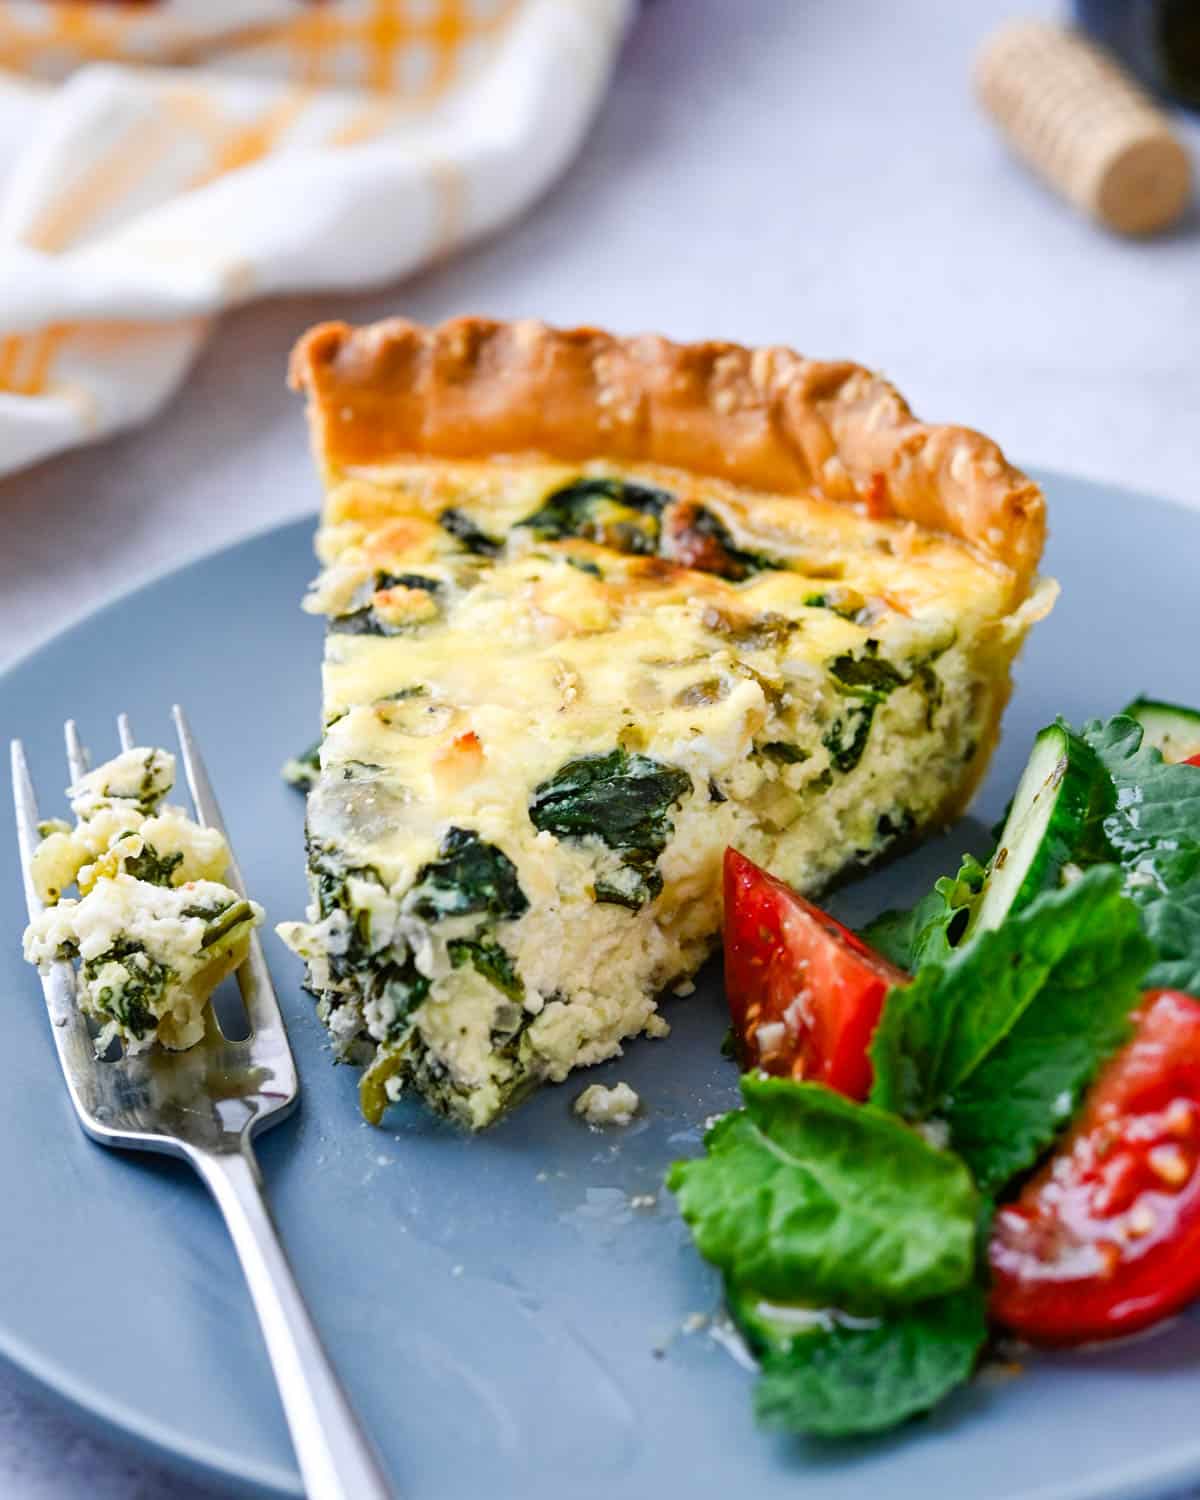 Serving a slice of quiche florentine with a side salad.